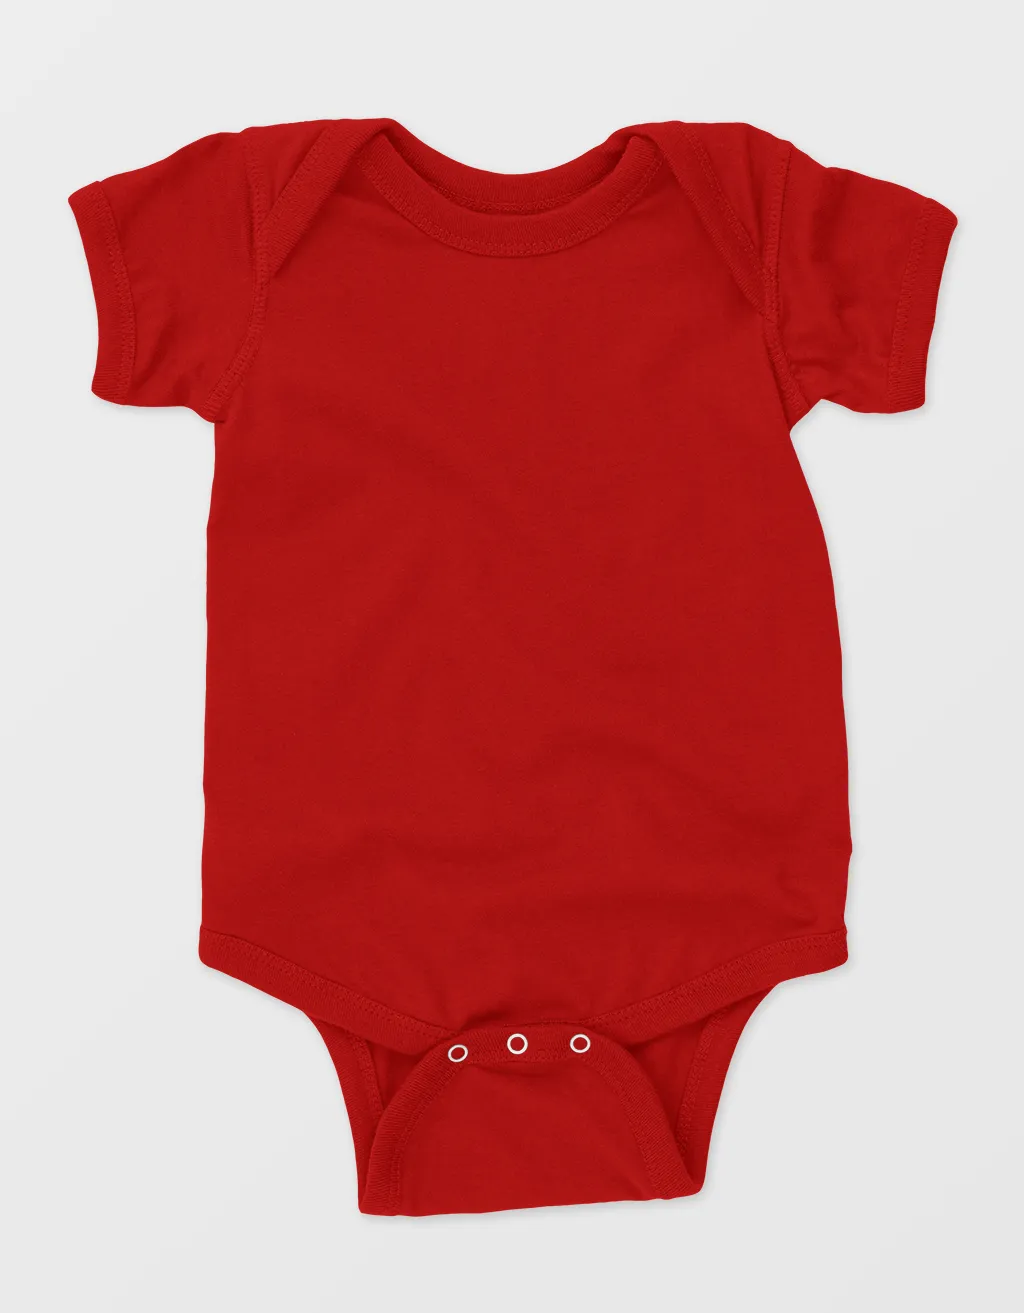 red onesies for babies boy and girl baby clothes online india